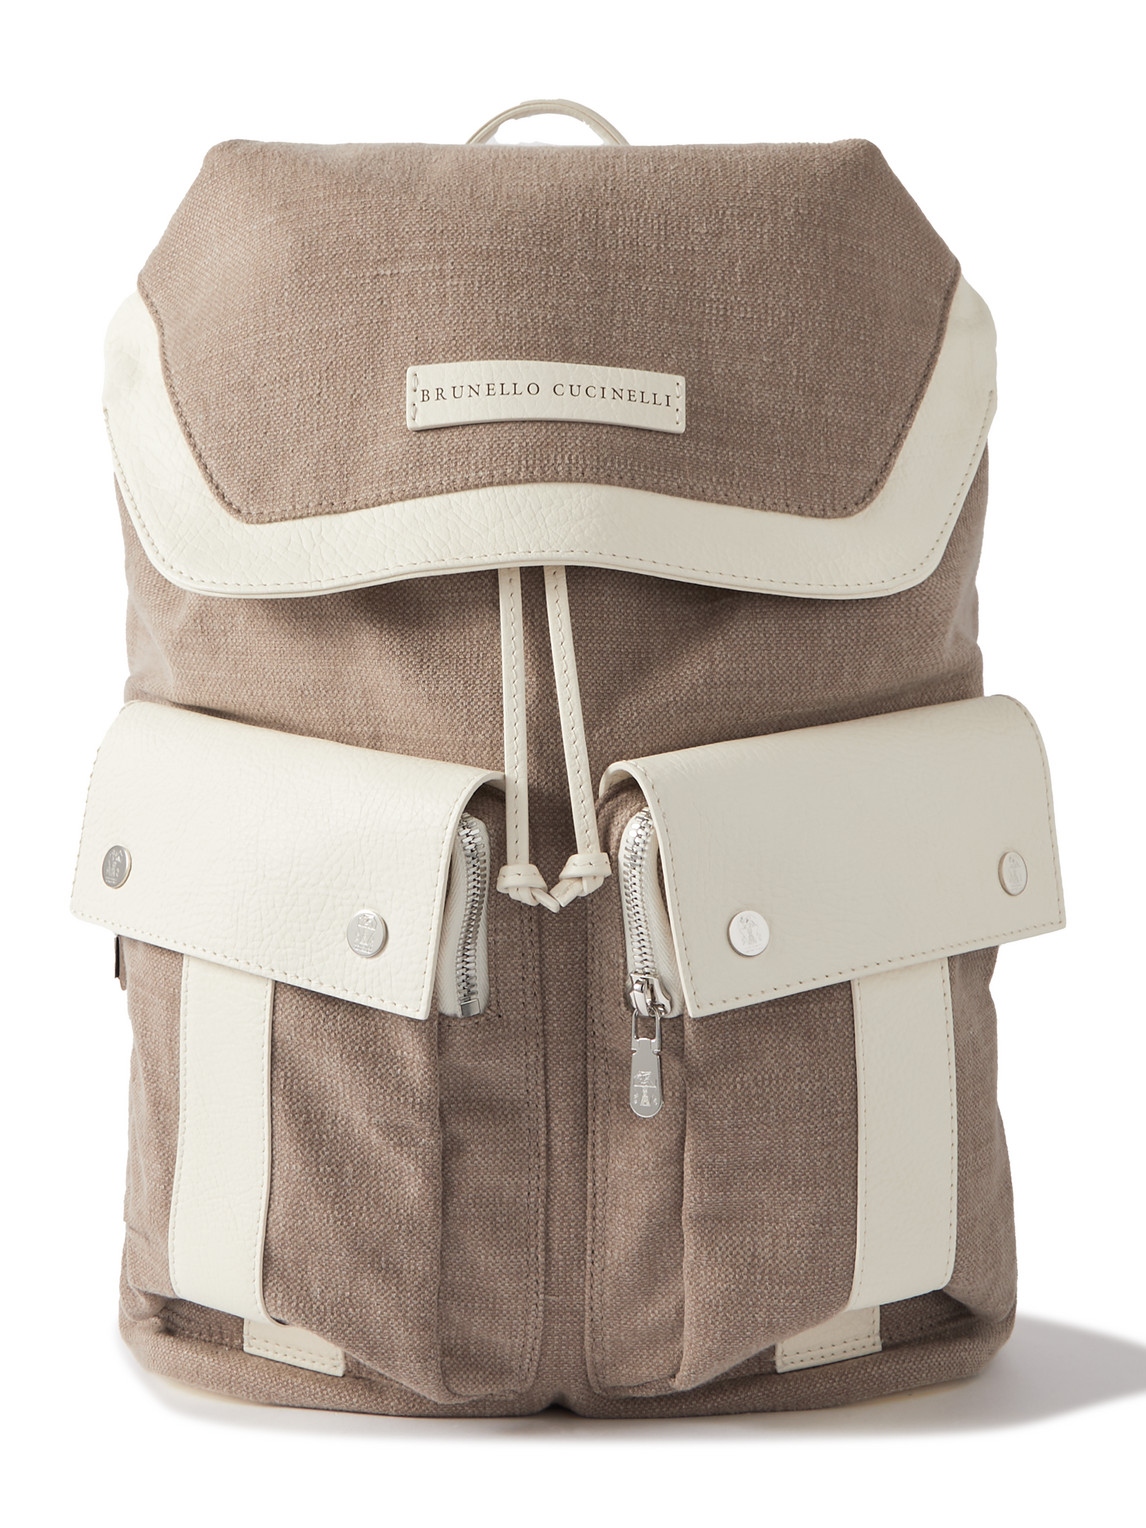 BRUNELLO CUCINELLI FULL-GRAIN LEATHER-TRIMMED COTTON AND LINEN-BLEND CANVAS BACKPACK